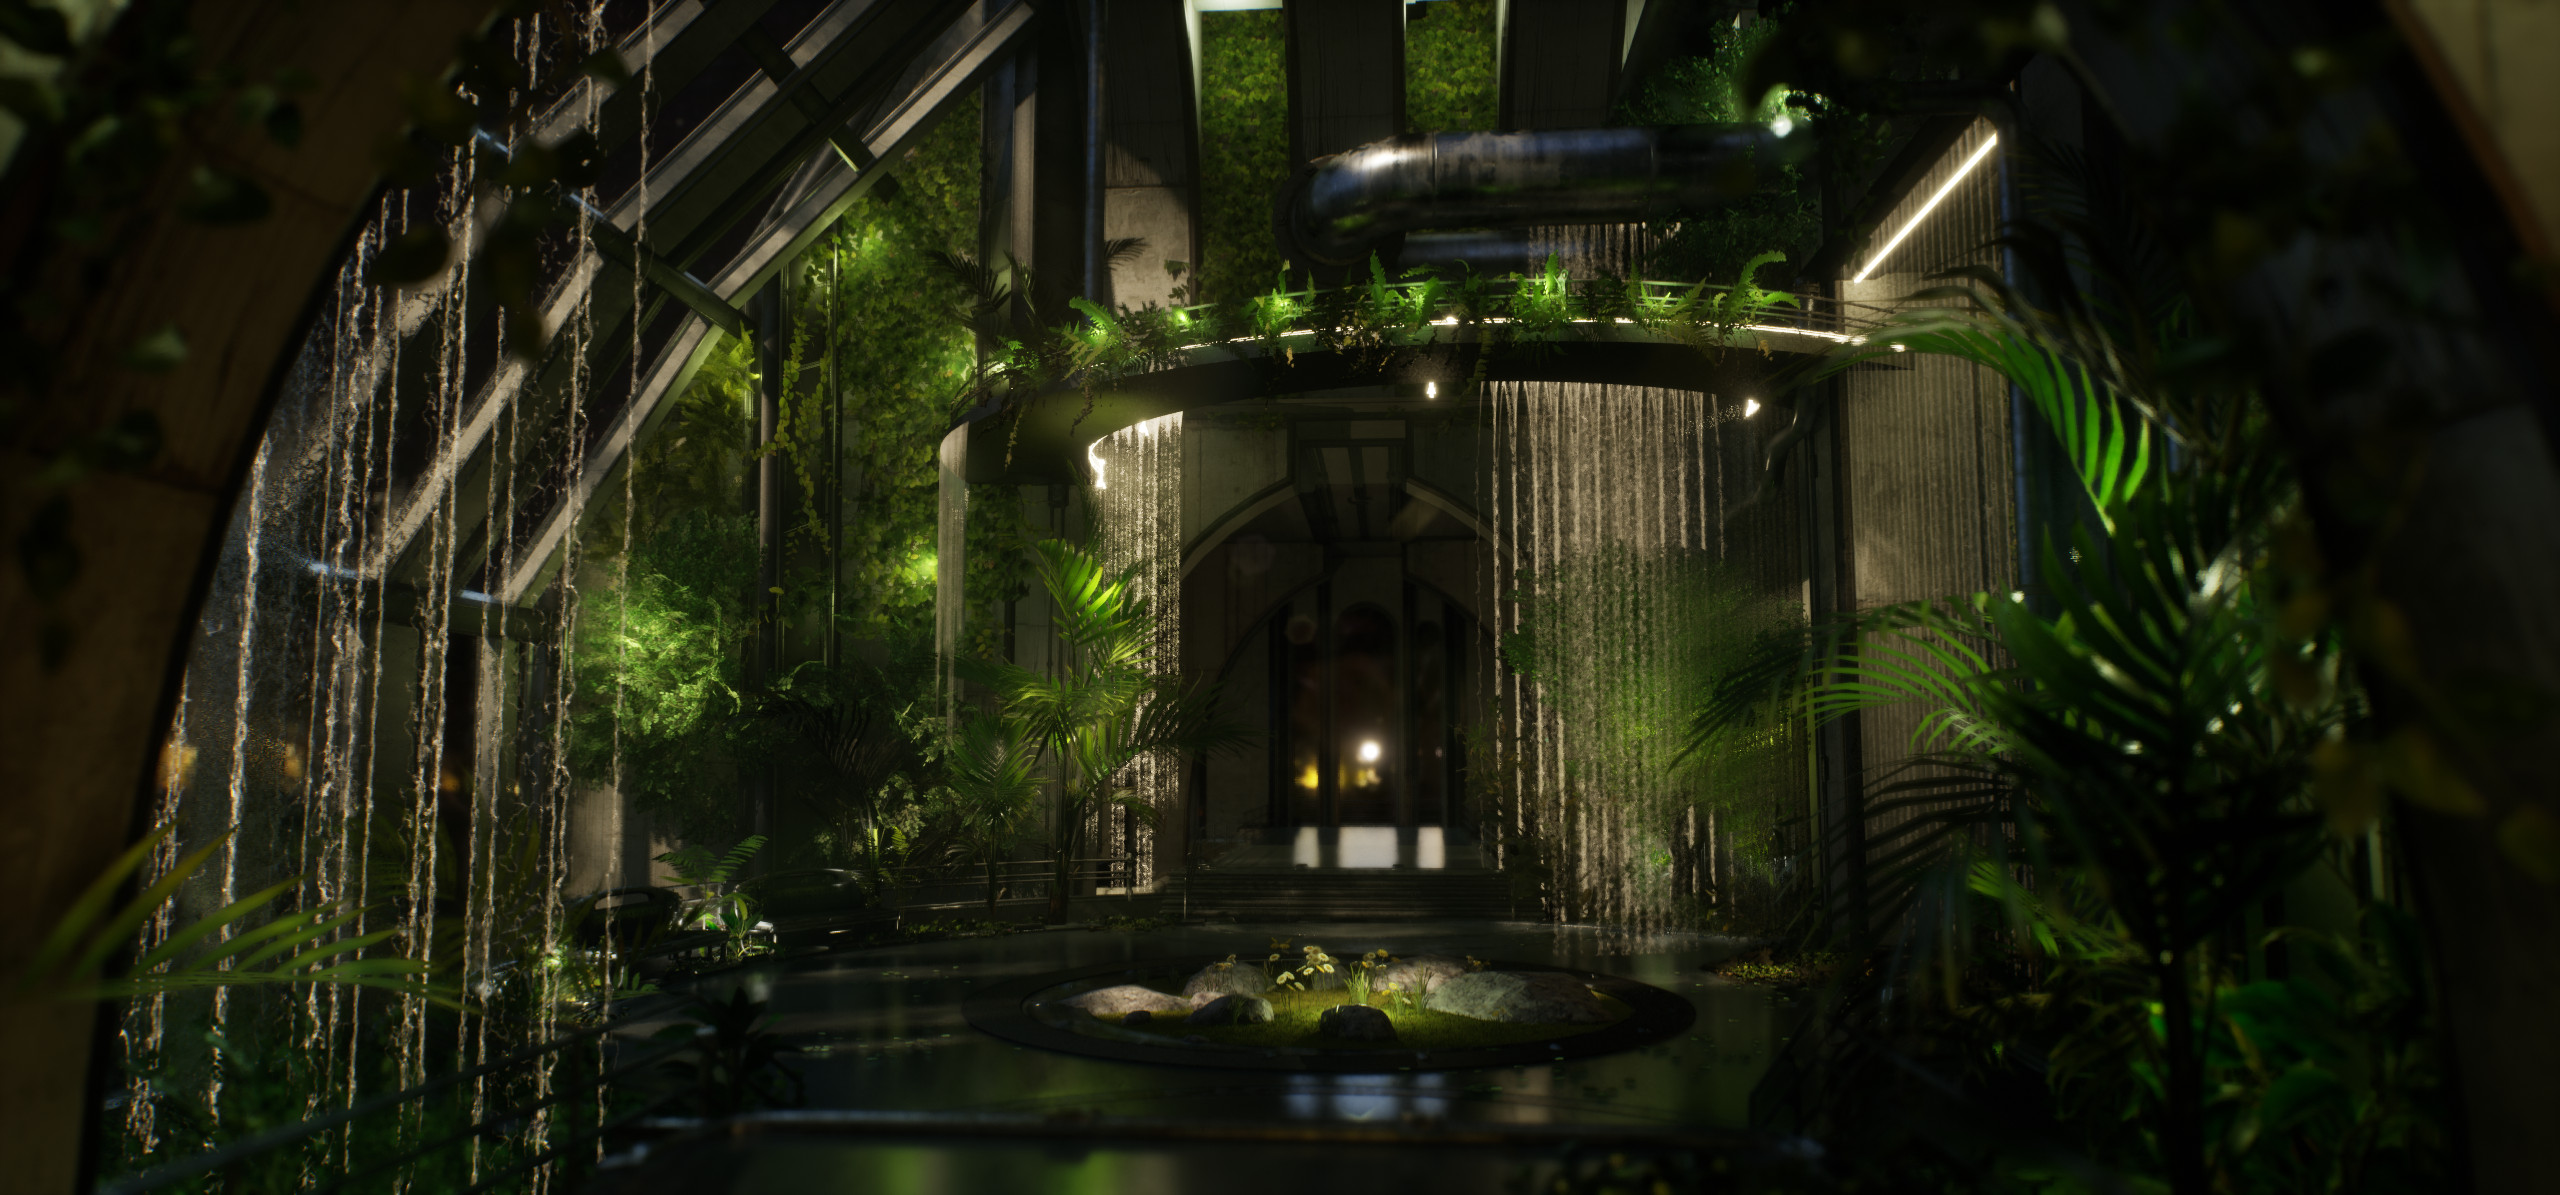 scene 3: luxury hotel which has lots of high tech hydroponic systems